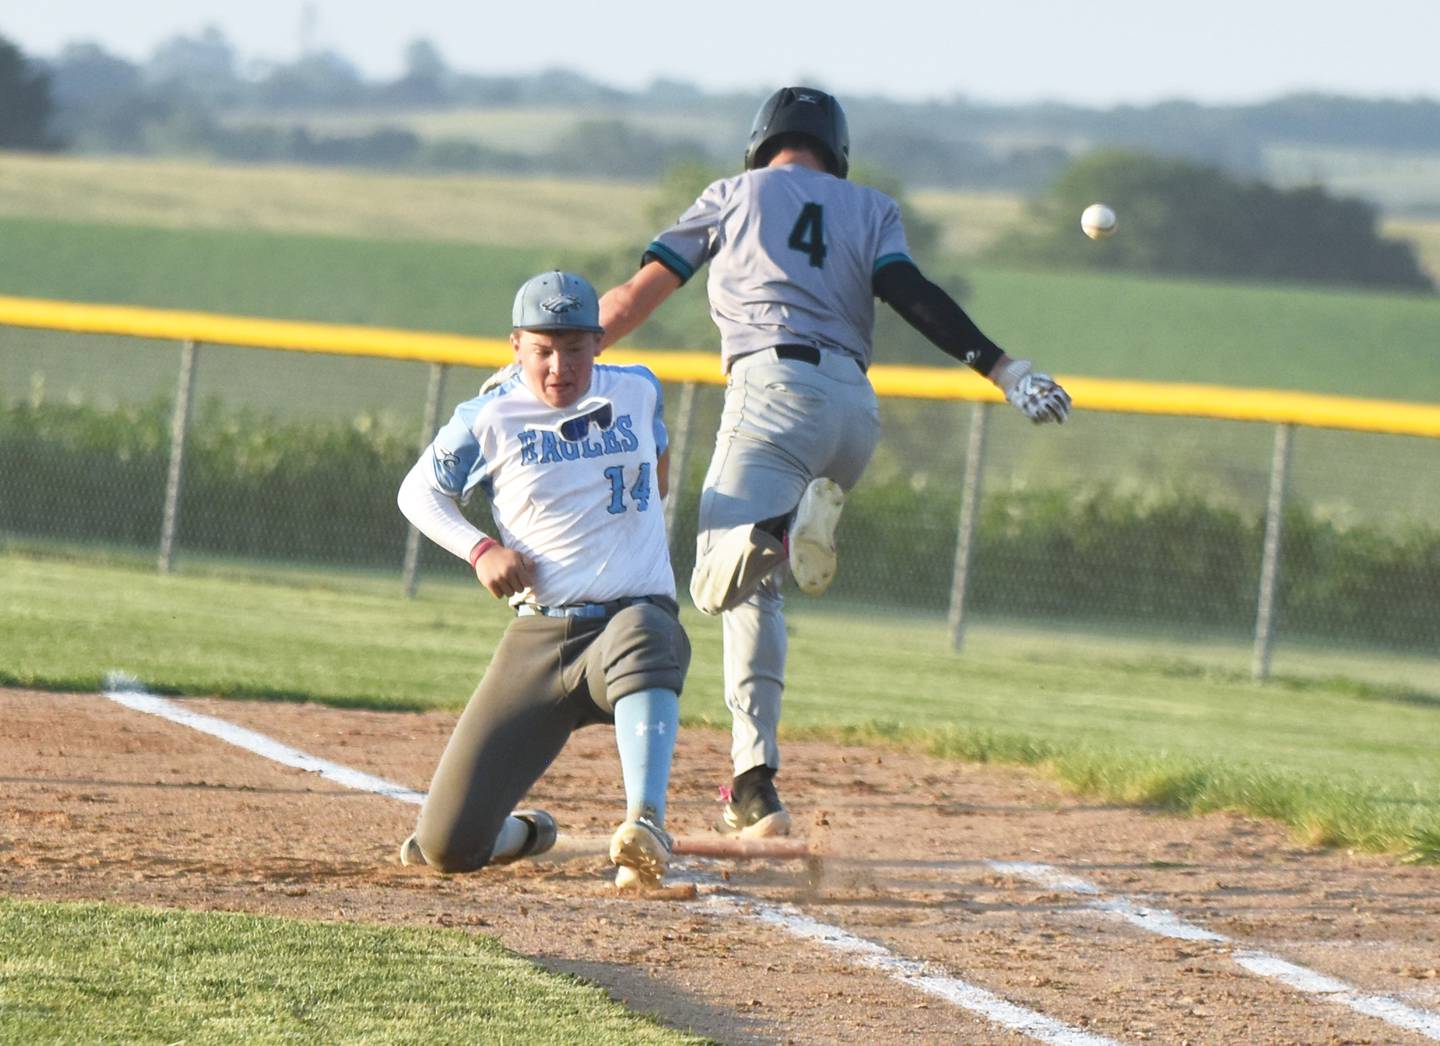 East Union first baseman Braden Kelley is hit by Southwest Valley runner Gavin Wetzel as he attempted to field the ball at first. There were numerous collisions throughout the game including Timberwolves’ Braden Maeder somersaulting out of bounds after a crash on his way to first base.